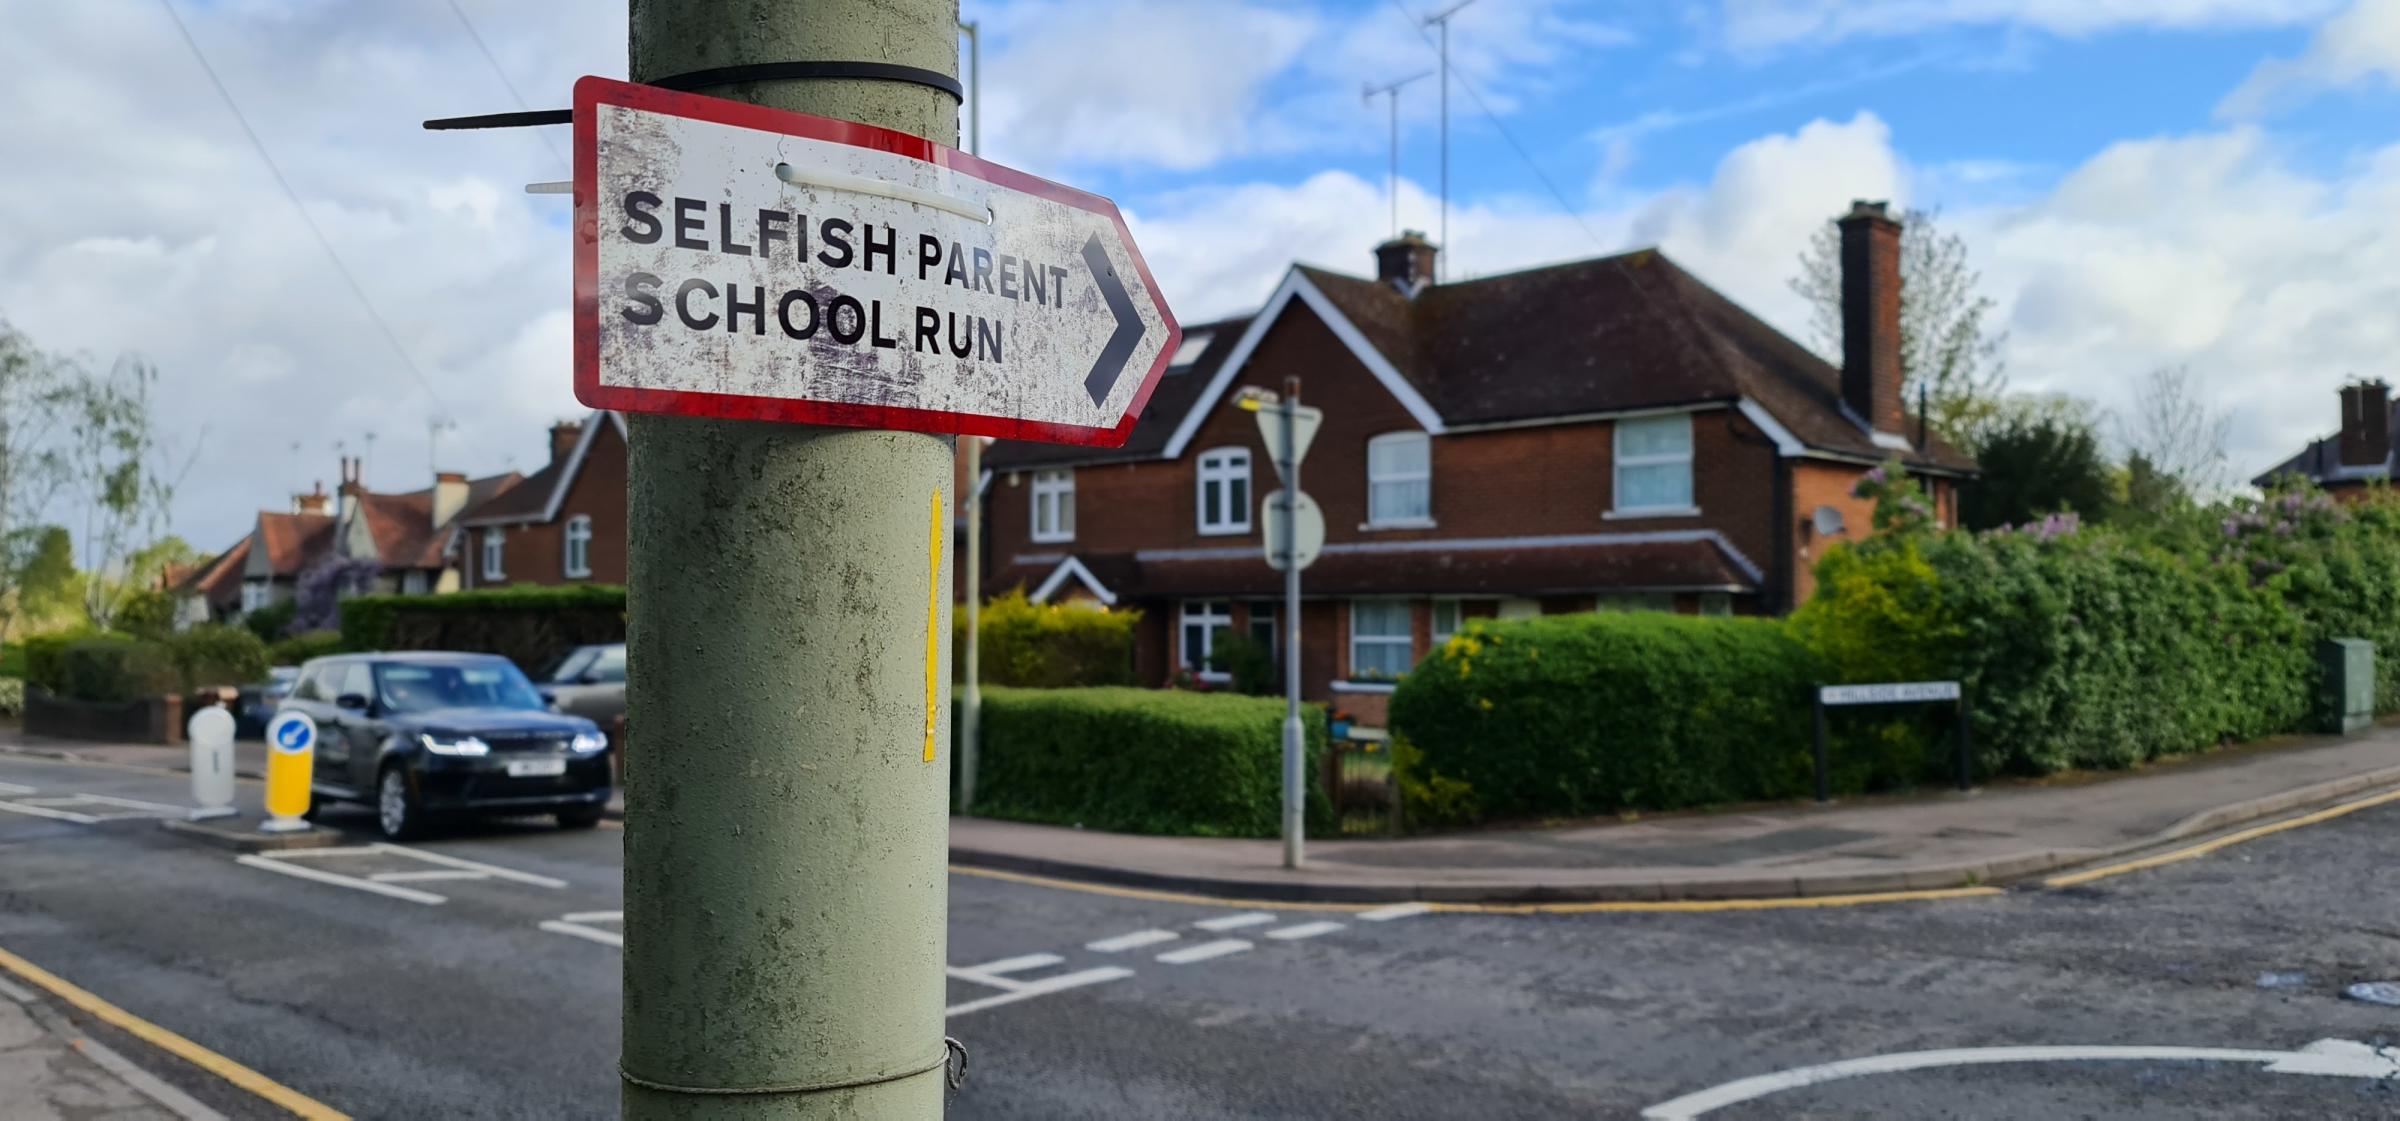 This sign stating Selfish Parent School Run has been stuck to a lamppost pointing in the direction of Hillside Avenue in Borehamwood